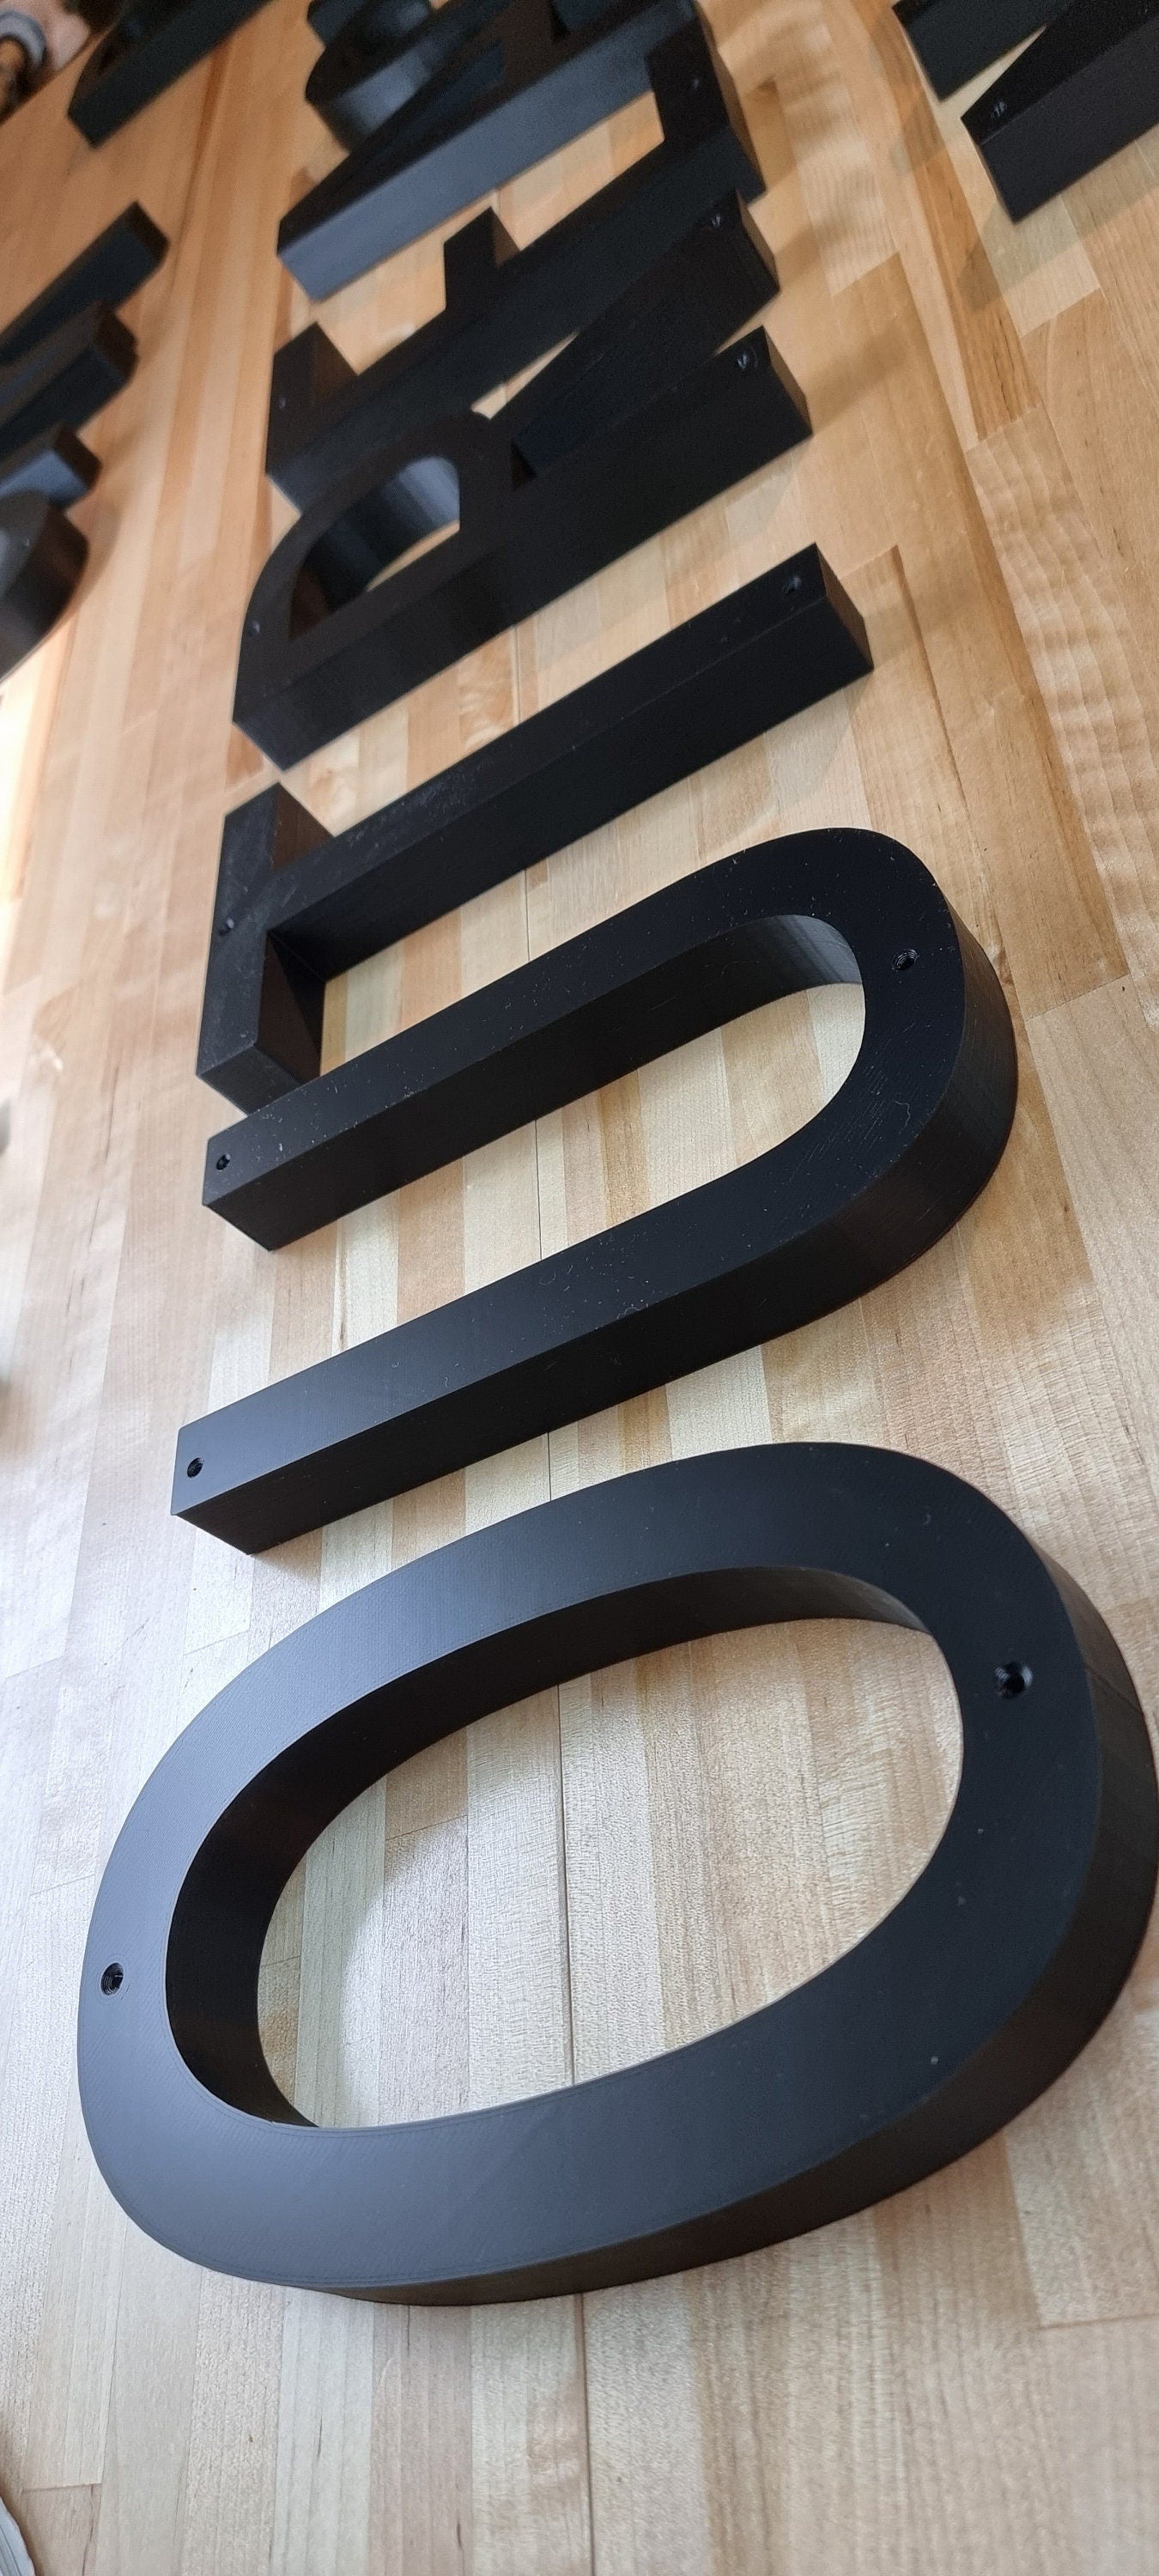 Custom Screw Mount Sign Letters (1in Thick). Any Font, Size Or Color. Stunning Screw Mount Sign Letters For Offices, Meeting Rooms & More!